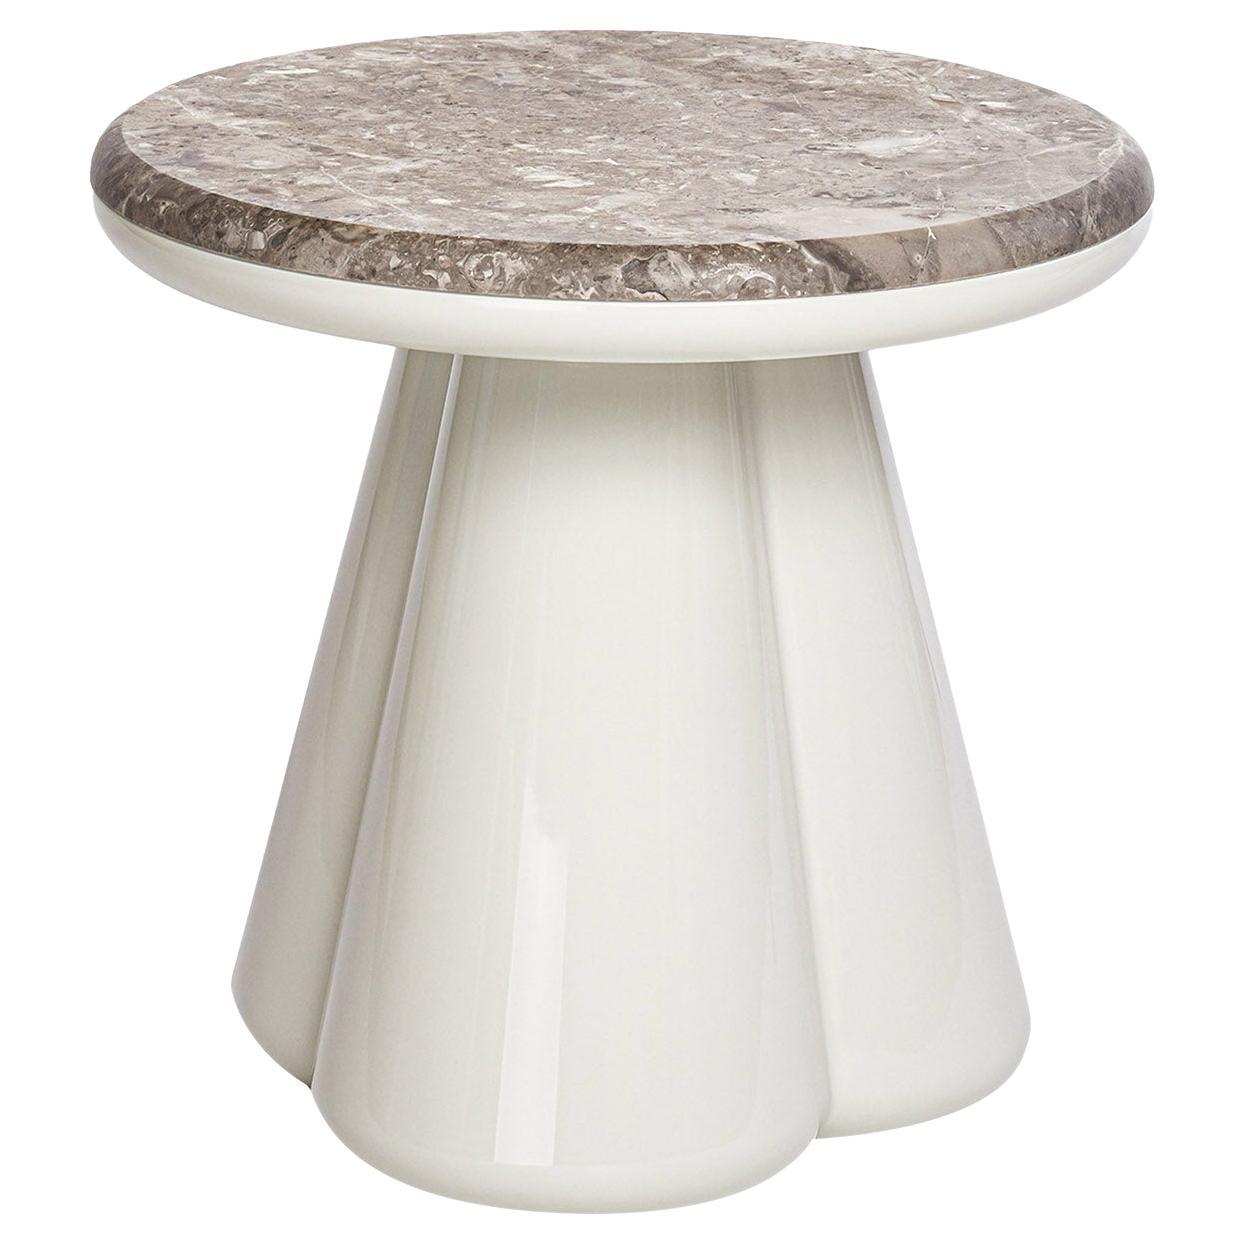 Table d'appoint Anodo blanche n°1